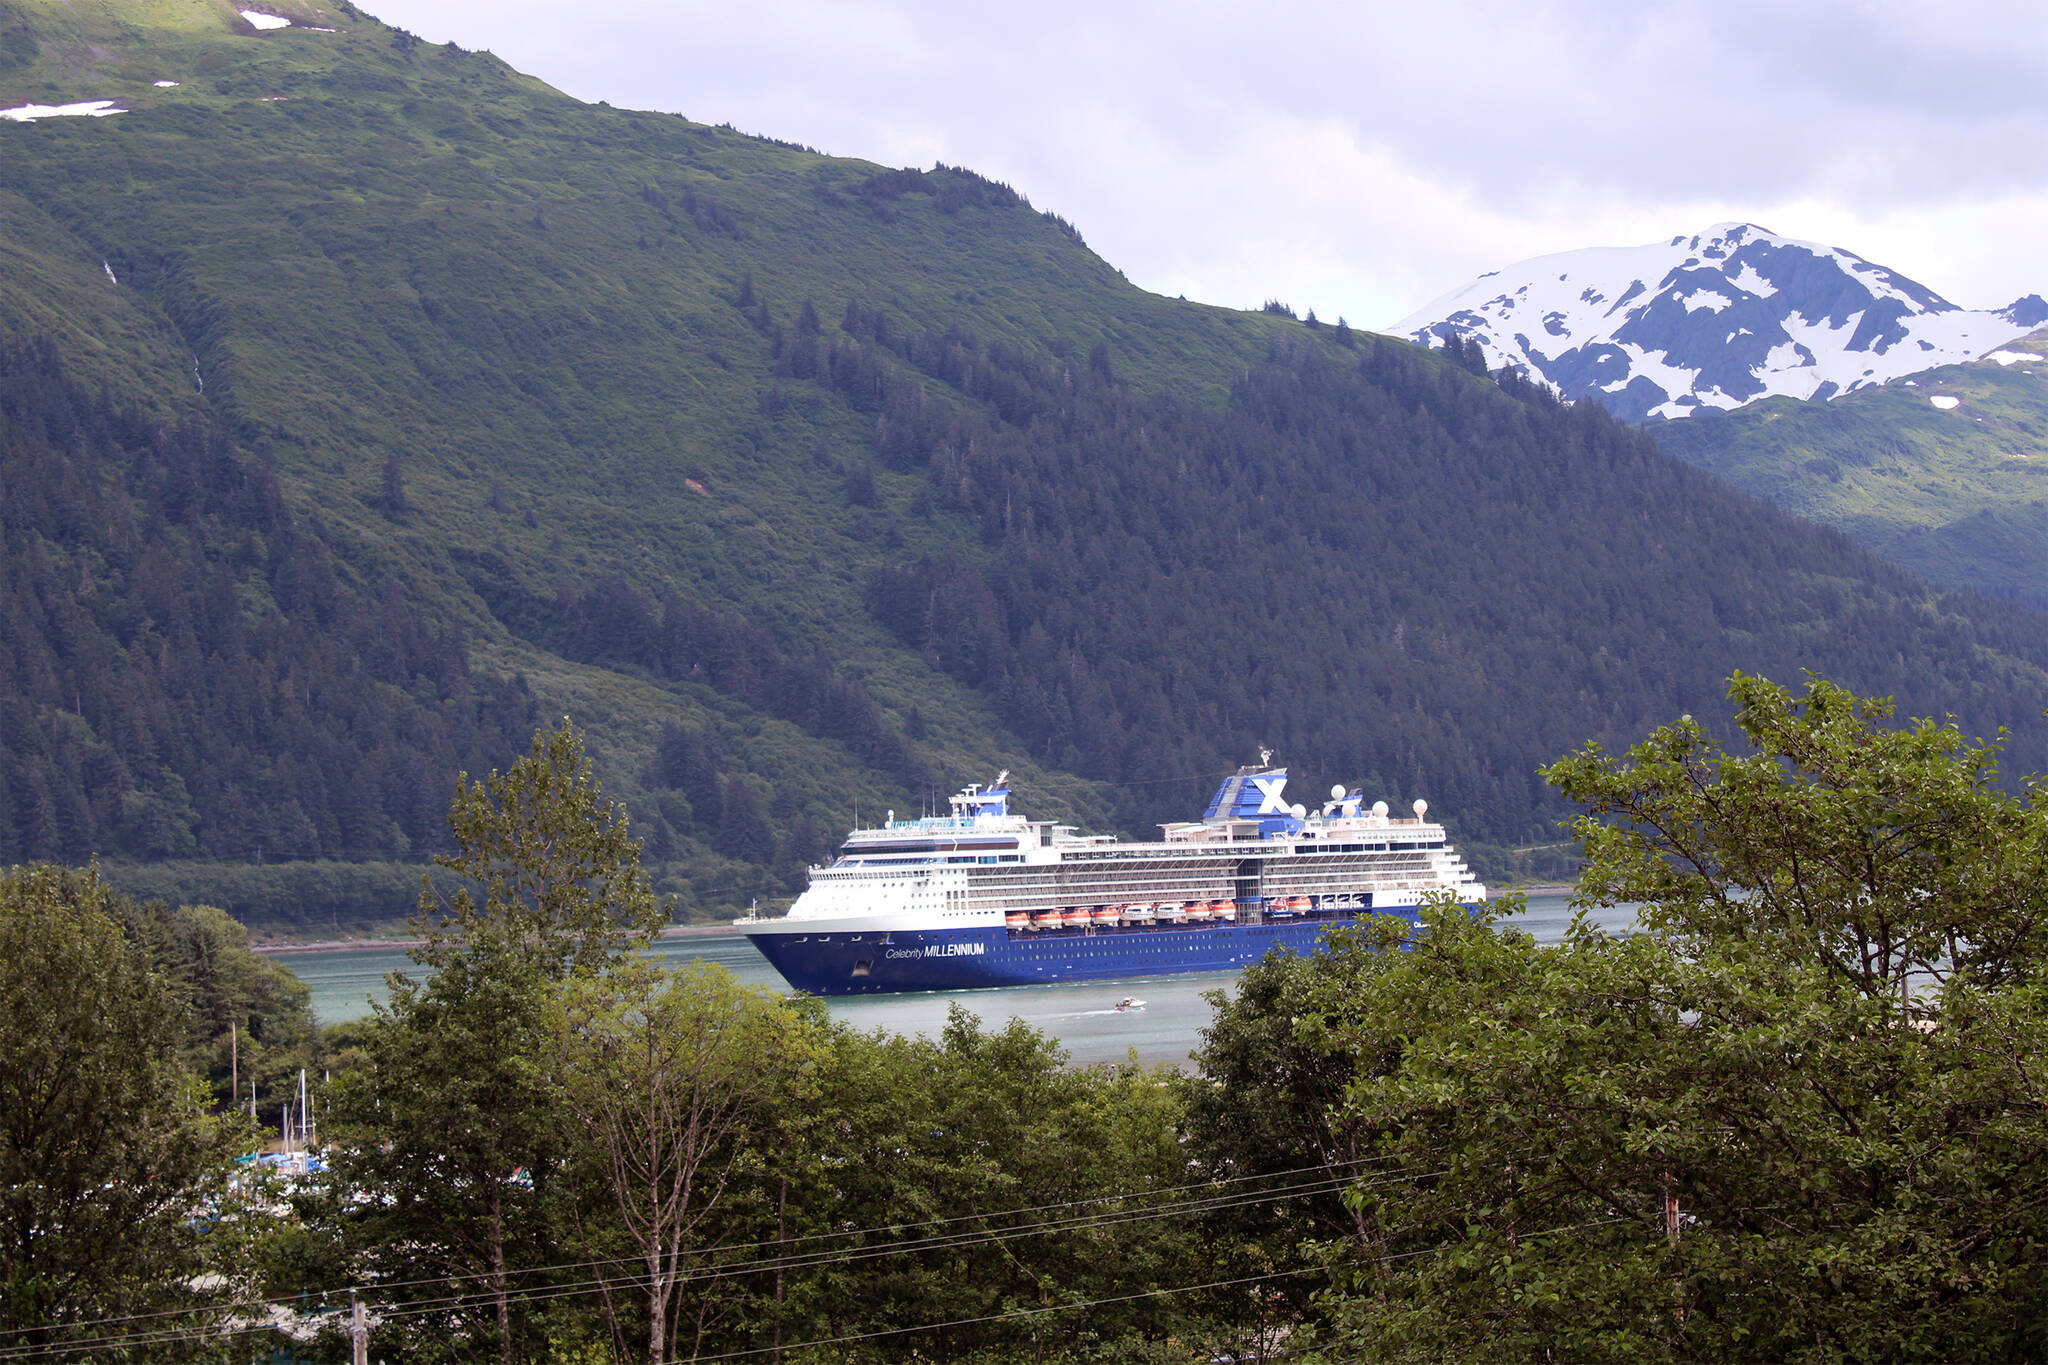 The Celebrity Millennium sails into the Port of Juneau early on the morning of July 26, 2021. During this voyage, onboard purchases were exempt from the City and Borough of Juneau’s sales tax. However, a new ordinance winding through the City Assembly could change that for next year. (Dana Zigmund/Juneau Empire)